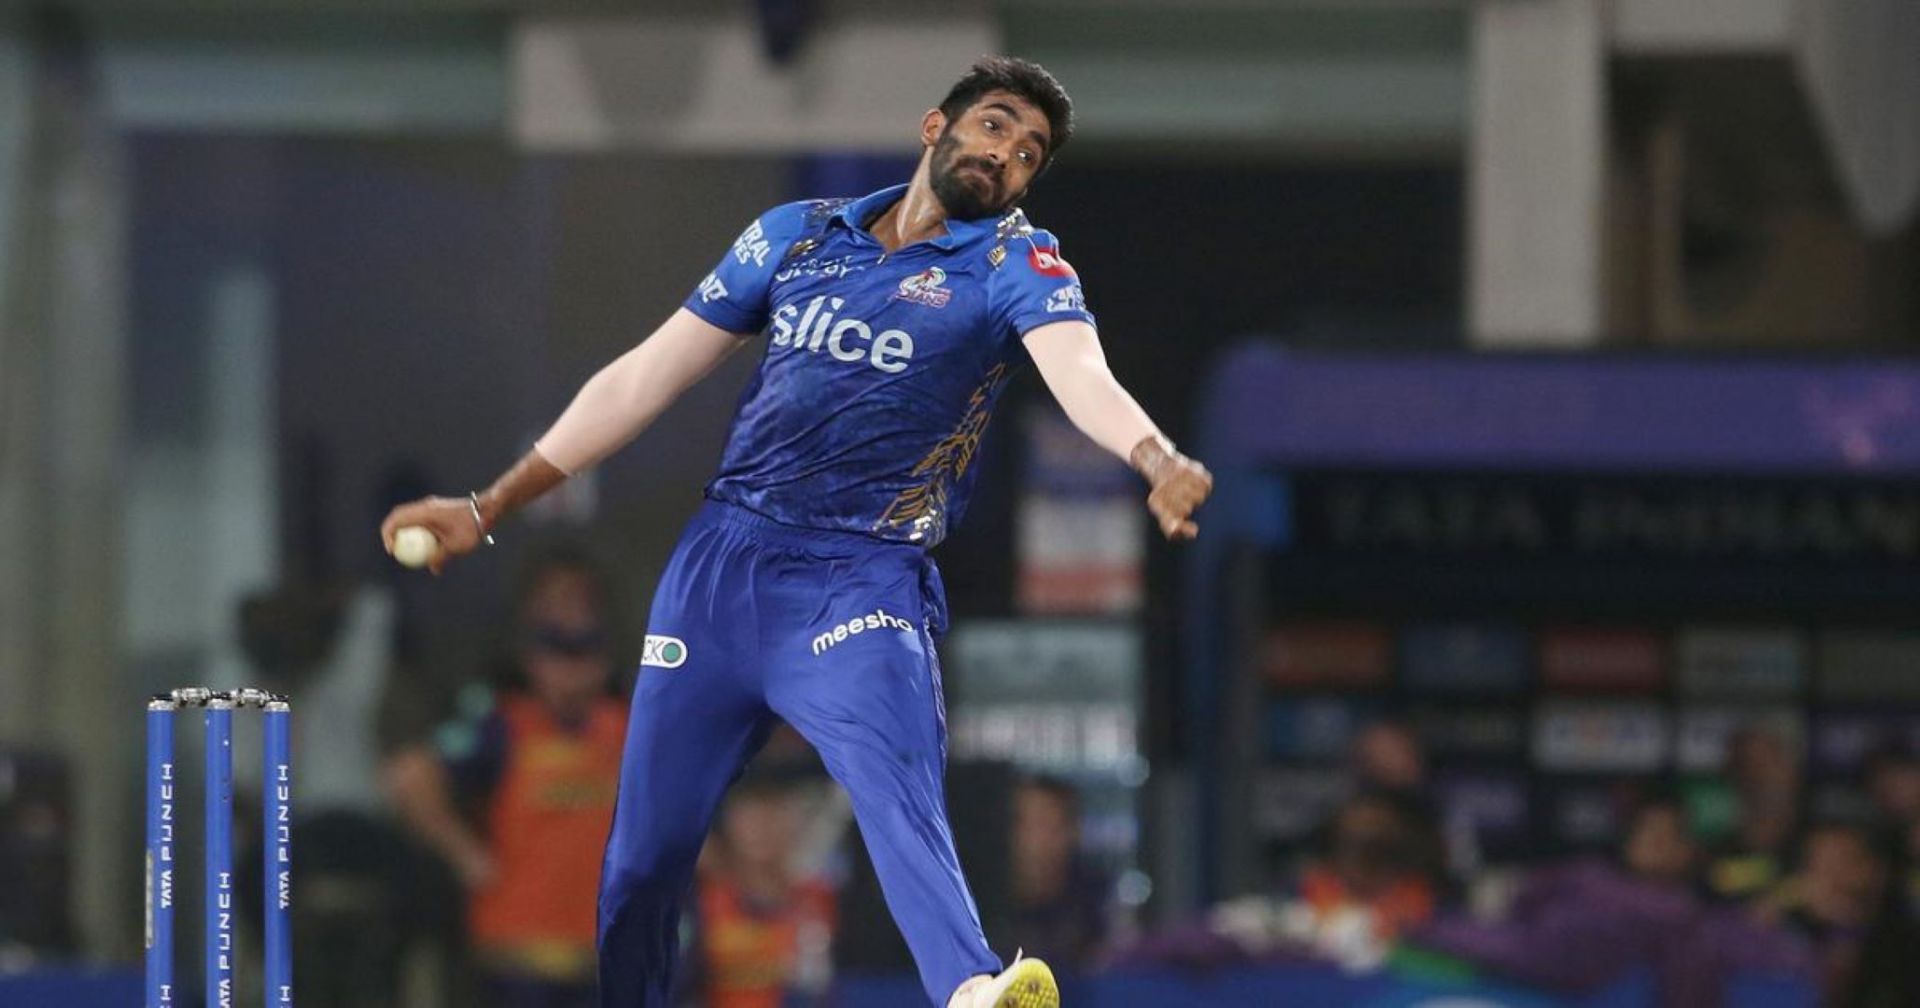 Mumbai Indians will be without their spearhead for IPL 2023